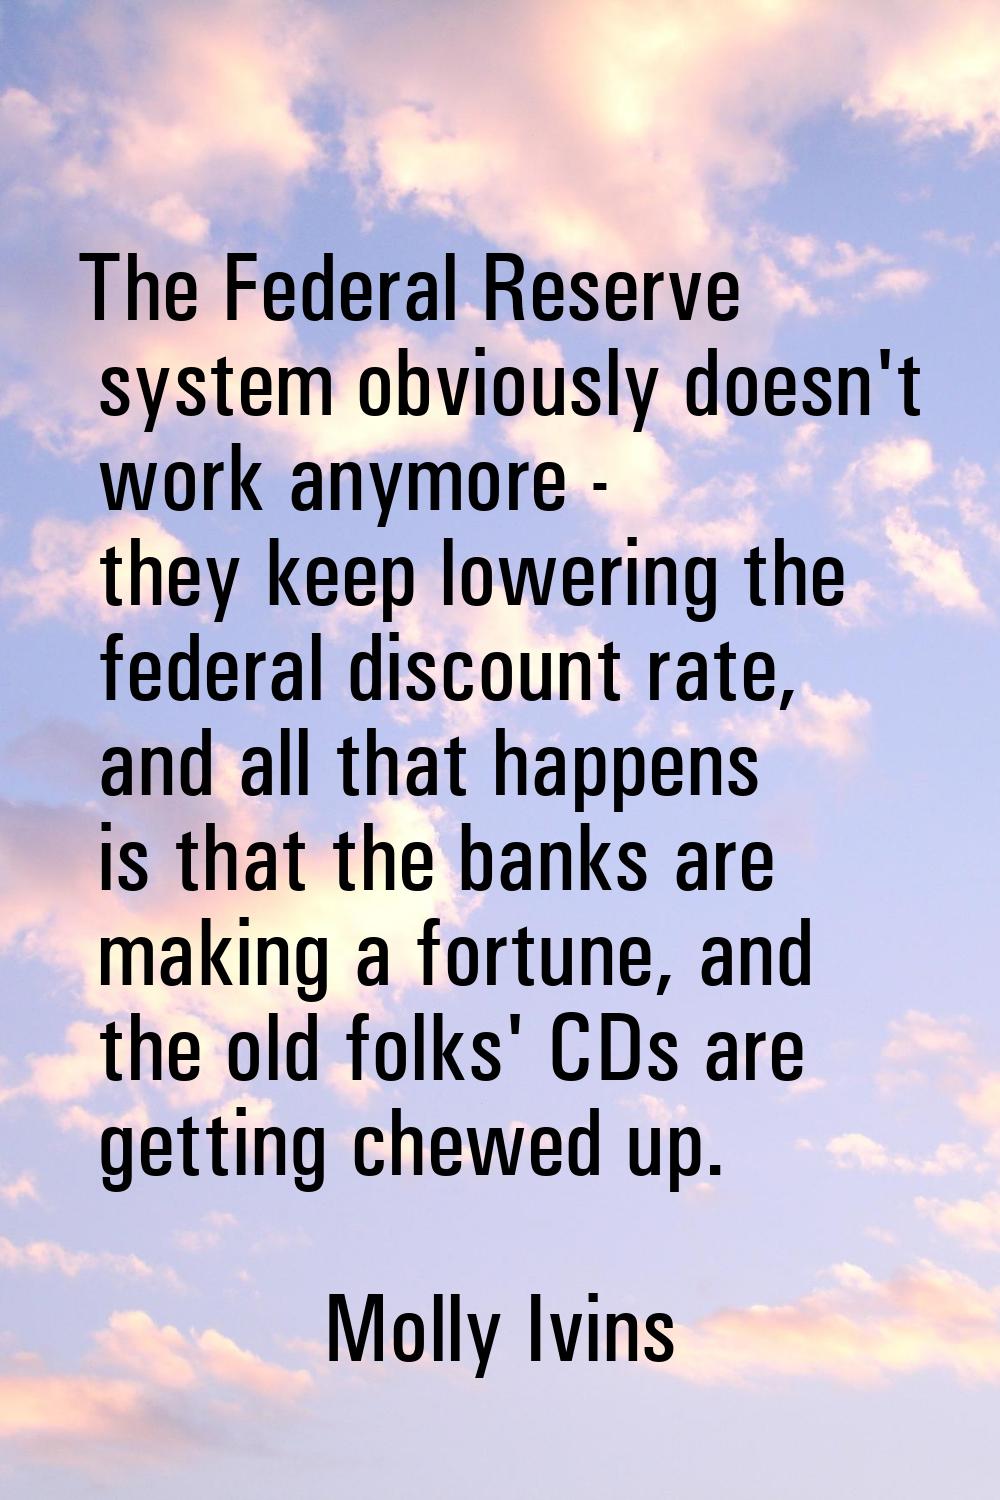 The Federal Reserve system obviously doesn't work anymore - they keep lowering the federal discount